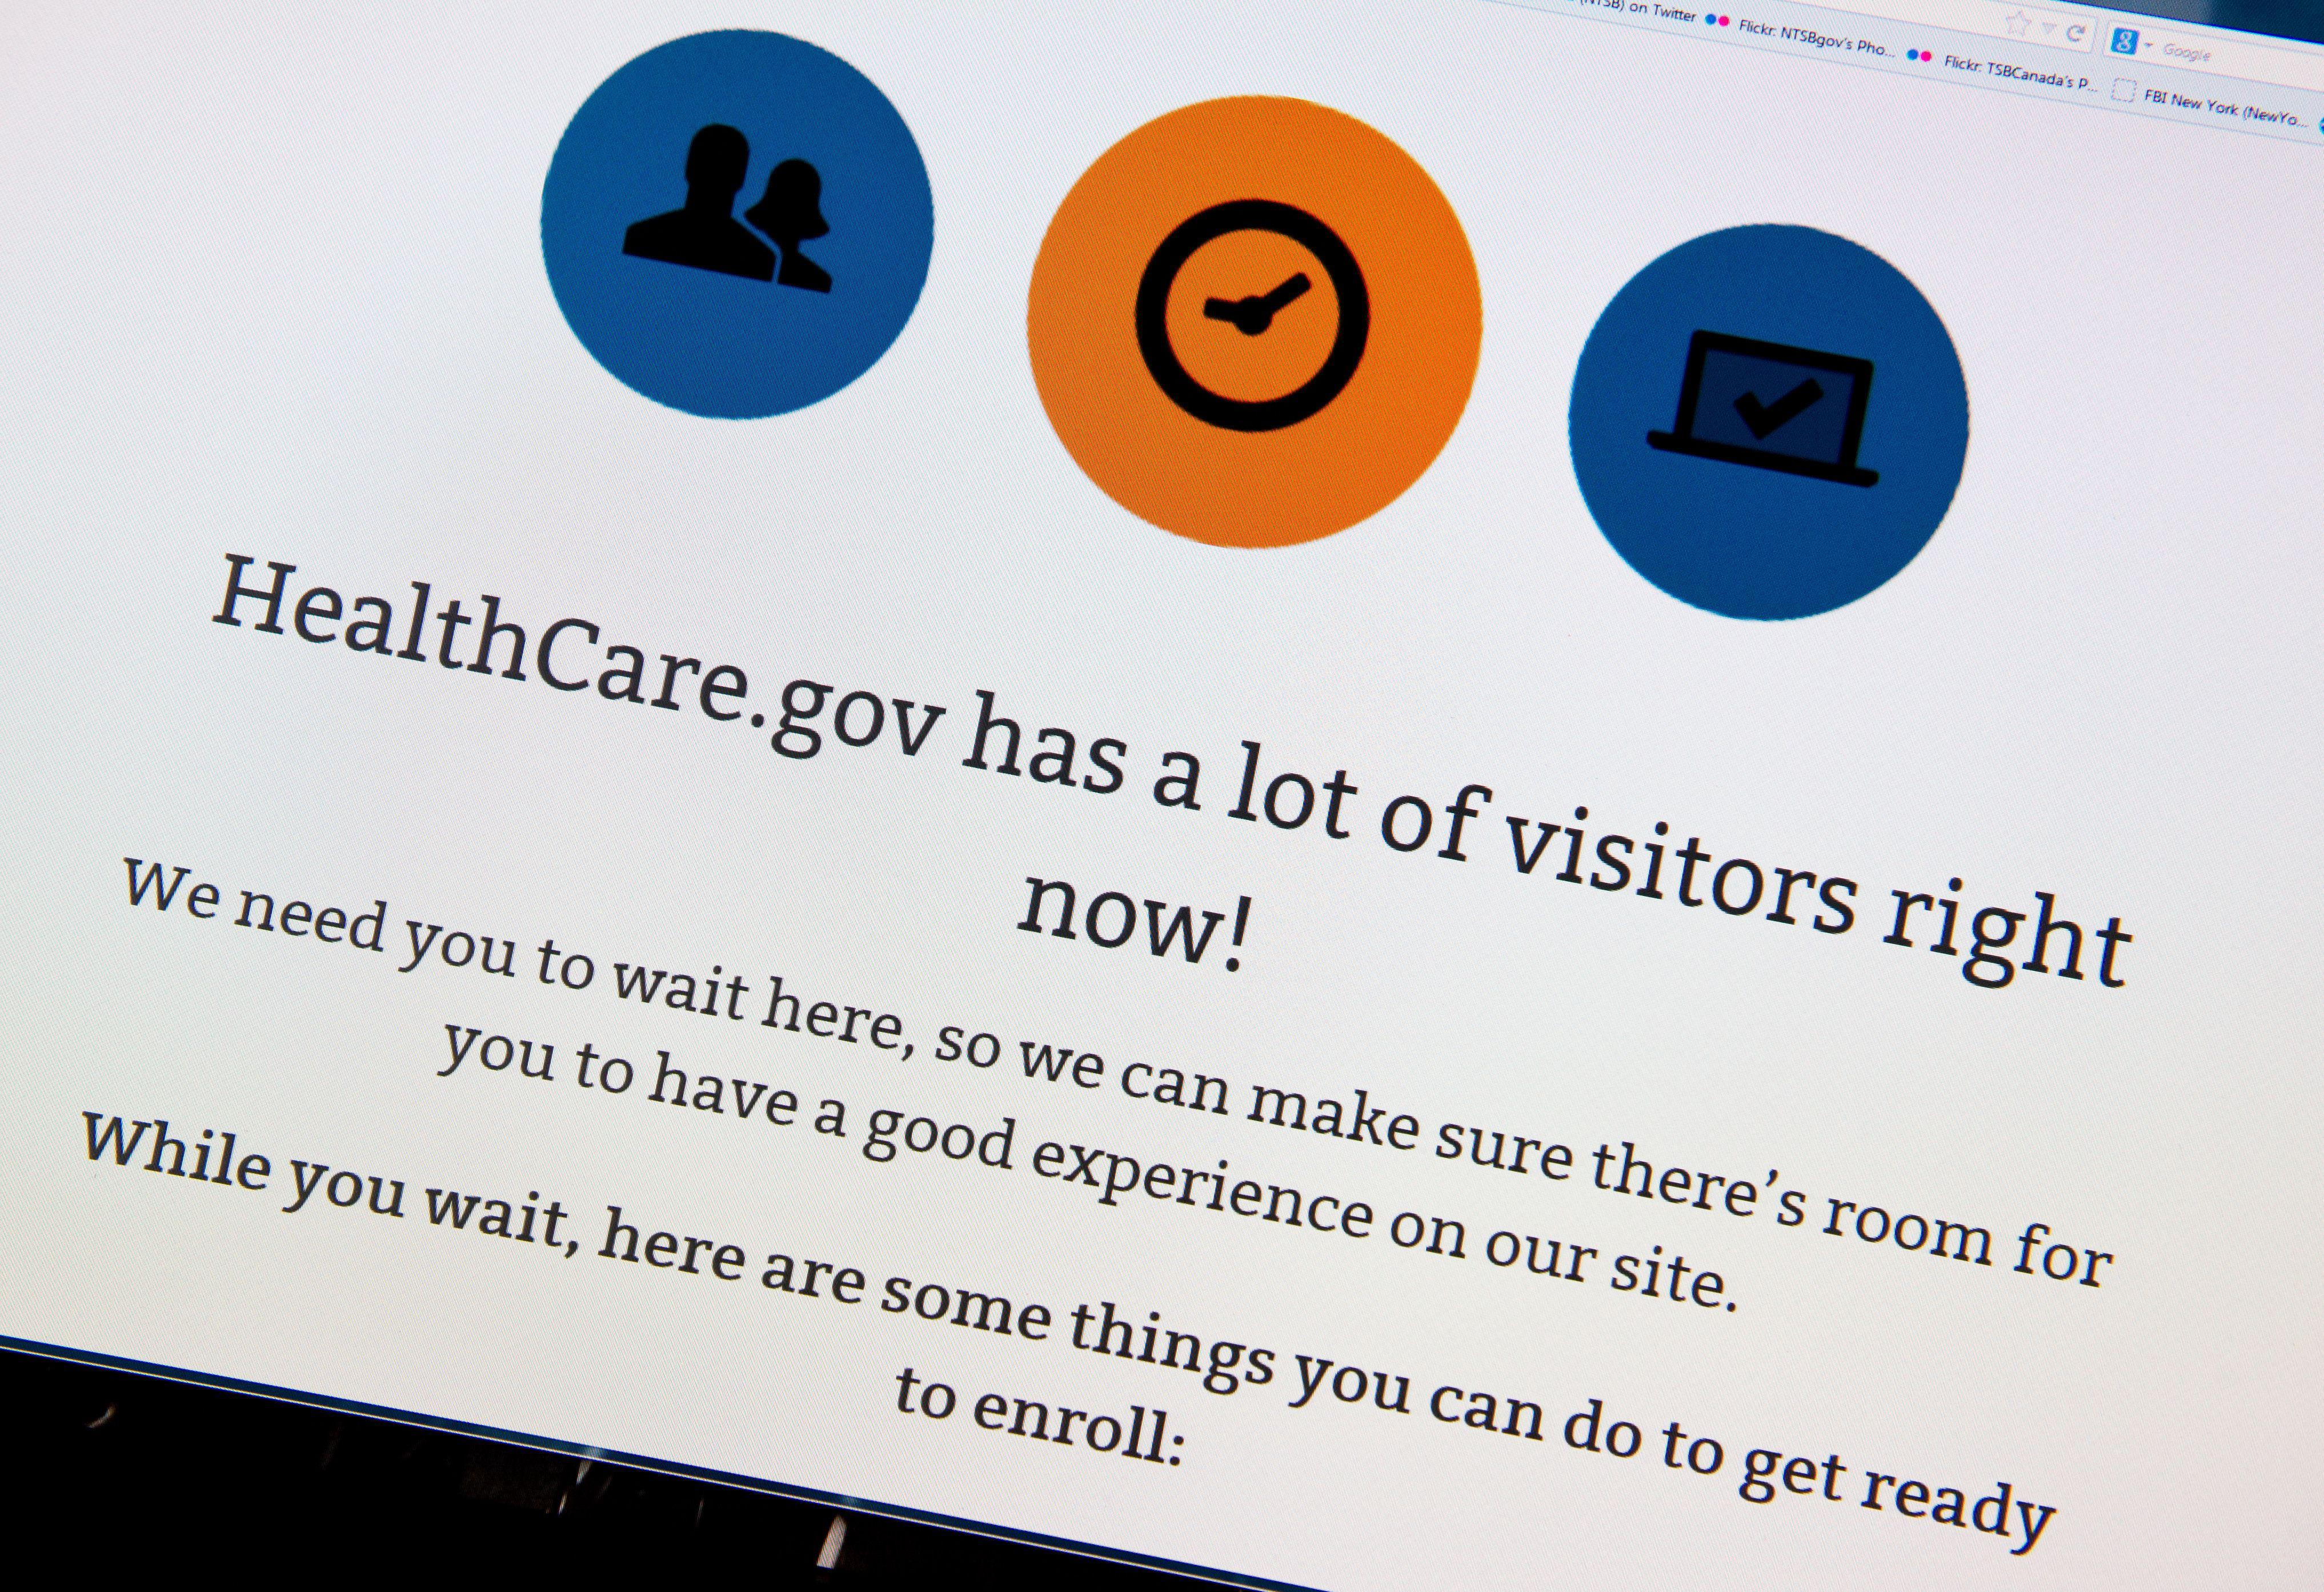 A waiting page on healthcare.gov